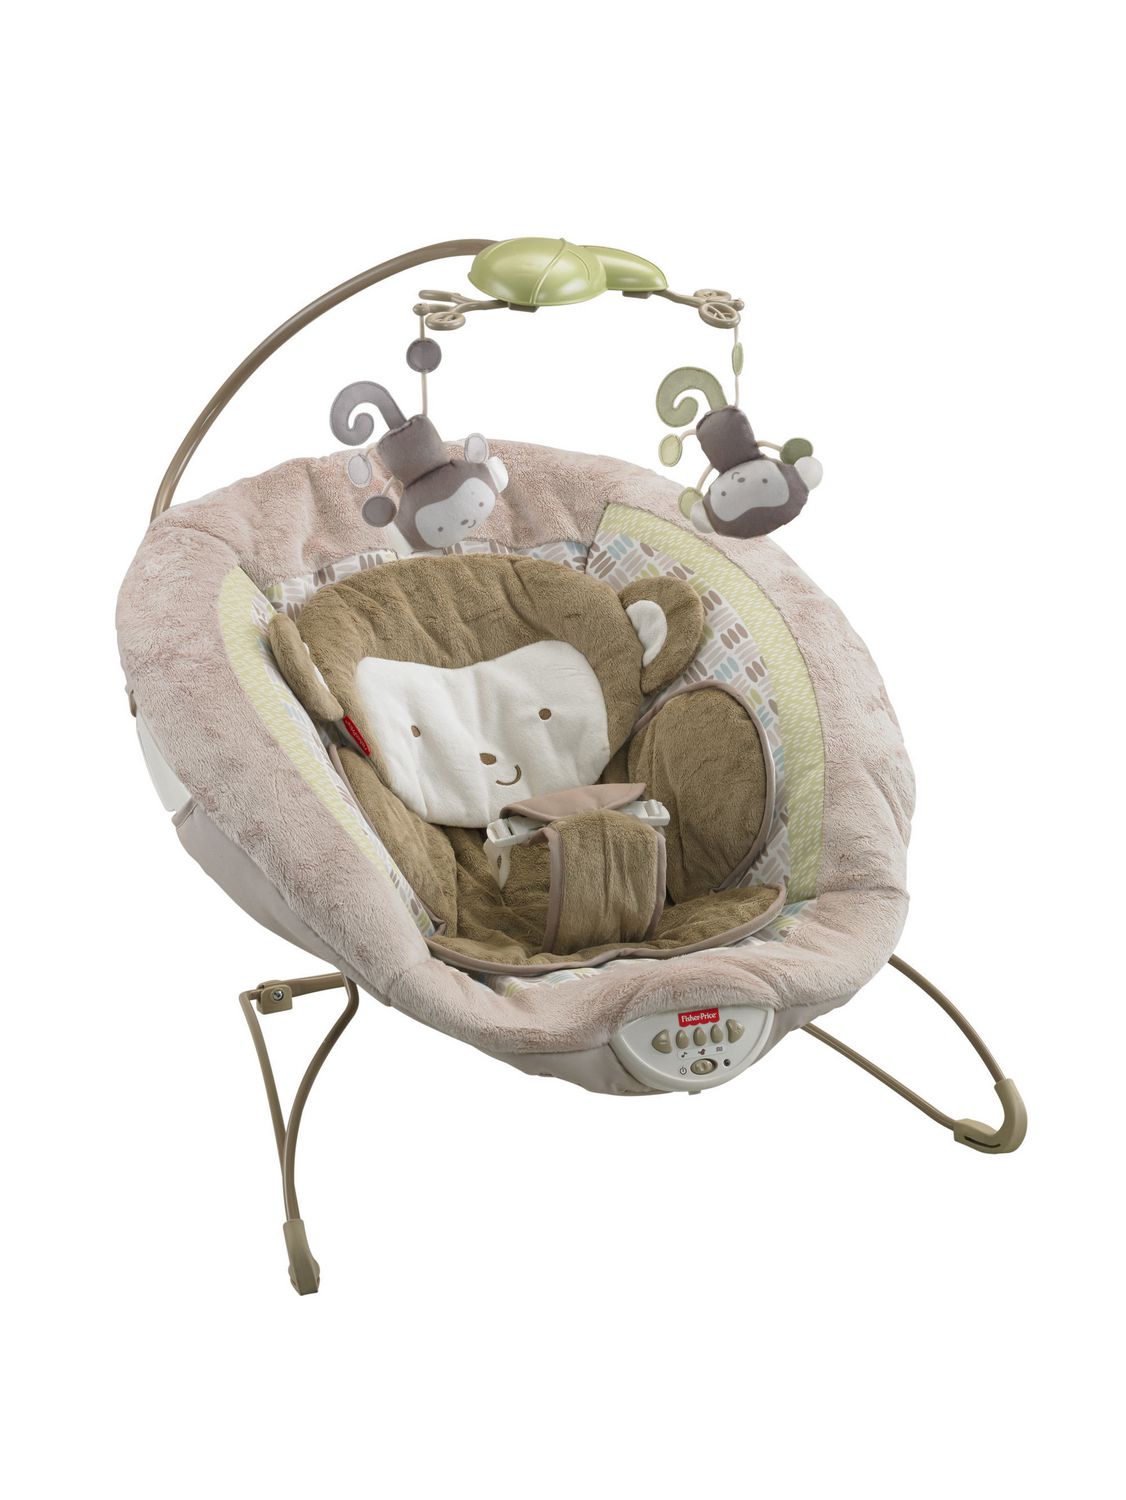 100 Baby Bouncer Chairs Baby Bouncer From Vaggaro Available